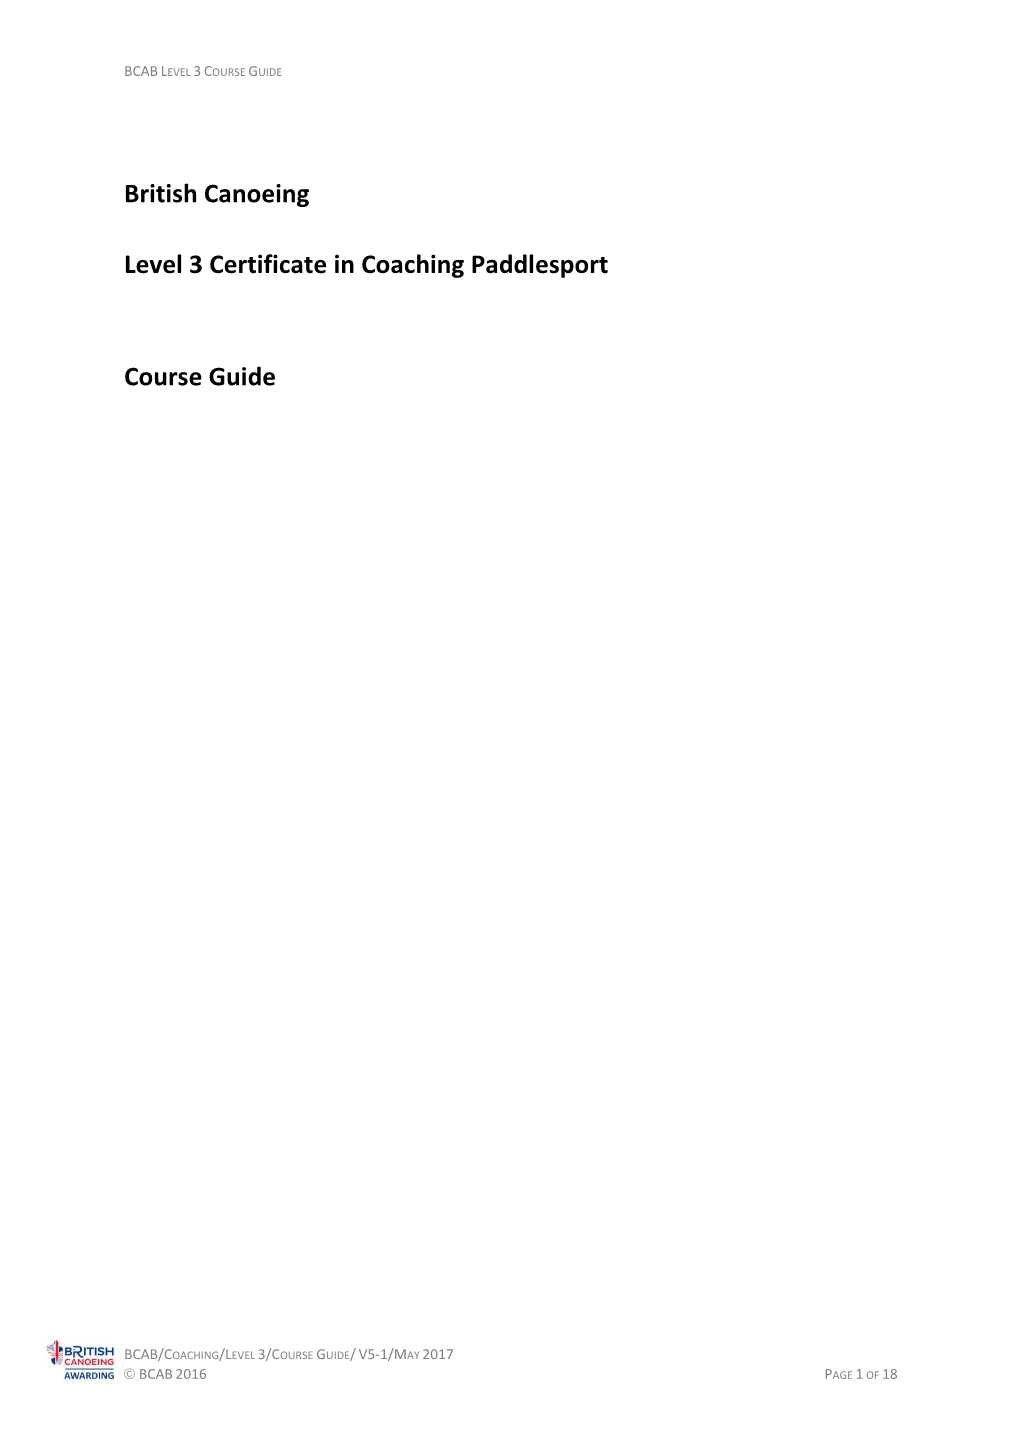 British Canoeing Level 3 Certificate in Coaching Paddlesport Course Guide Is the Copyright of the British Canoeing